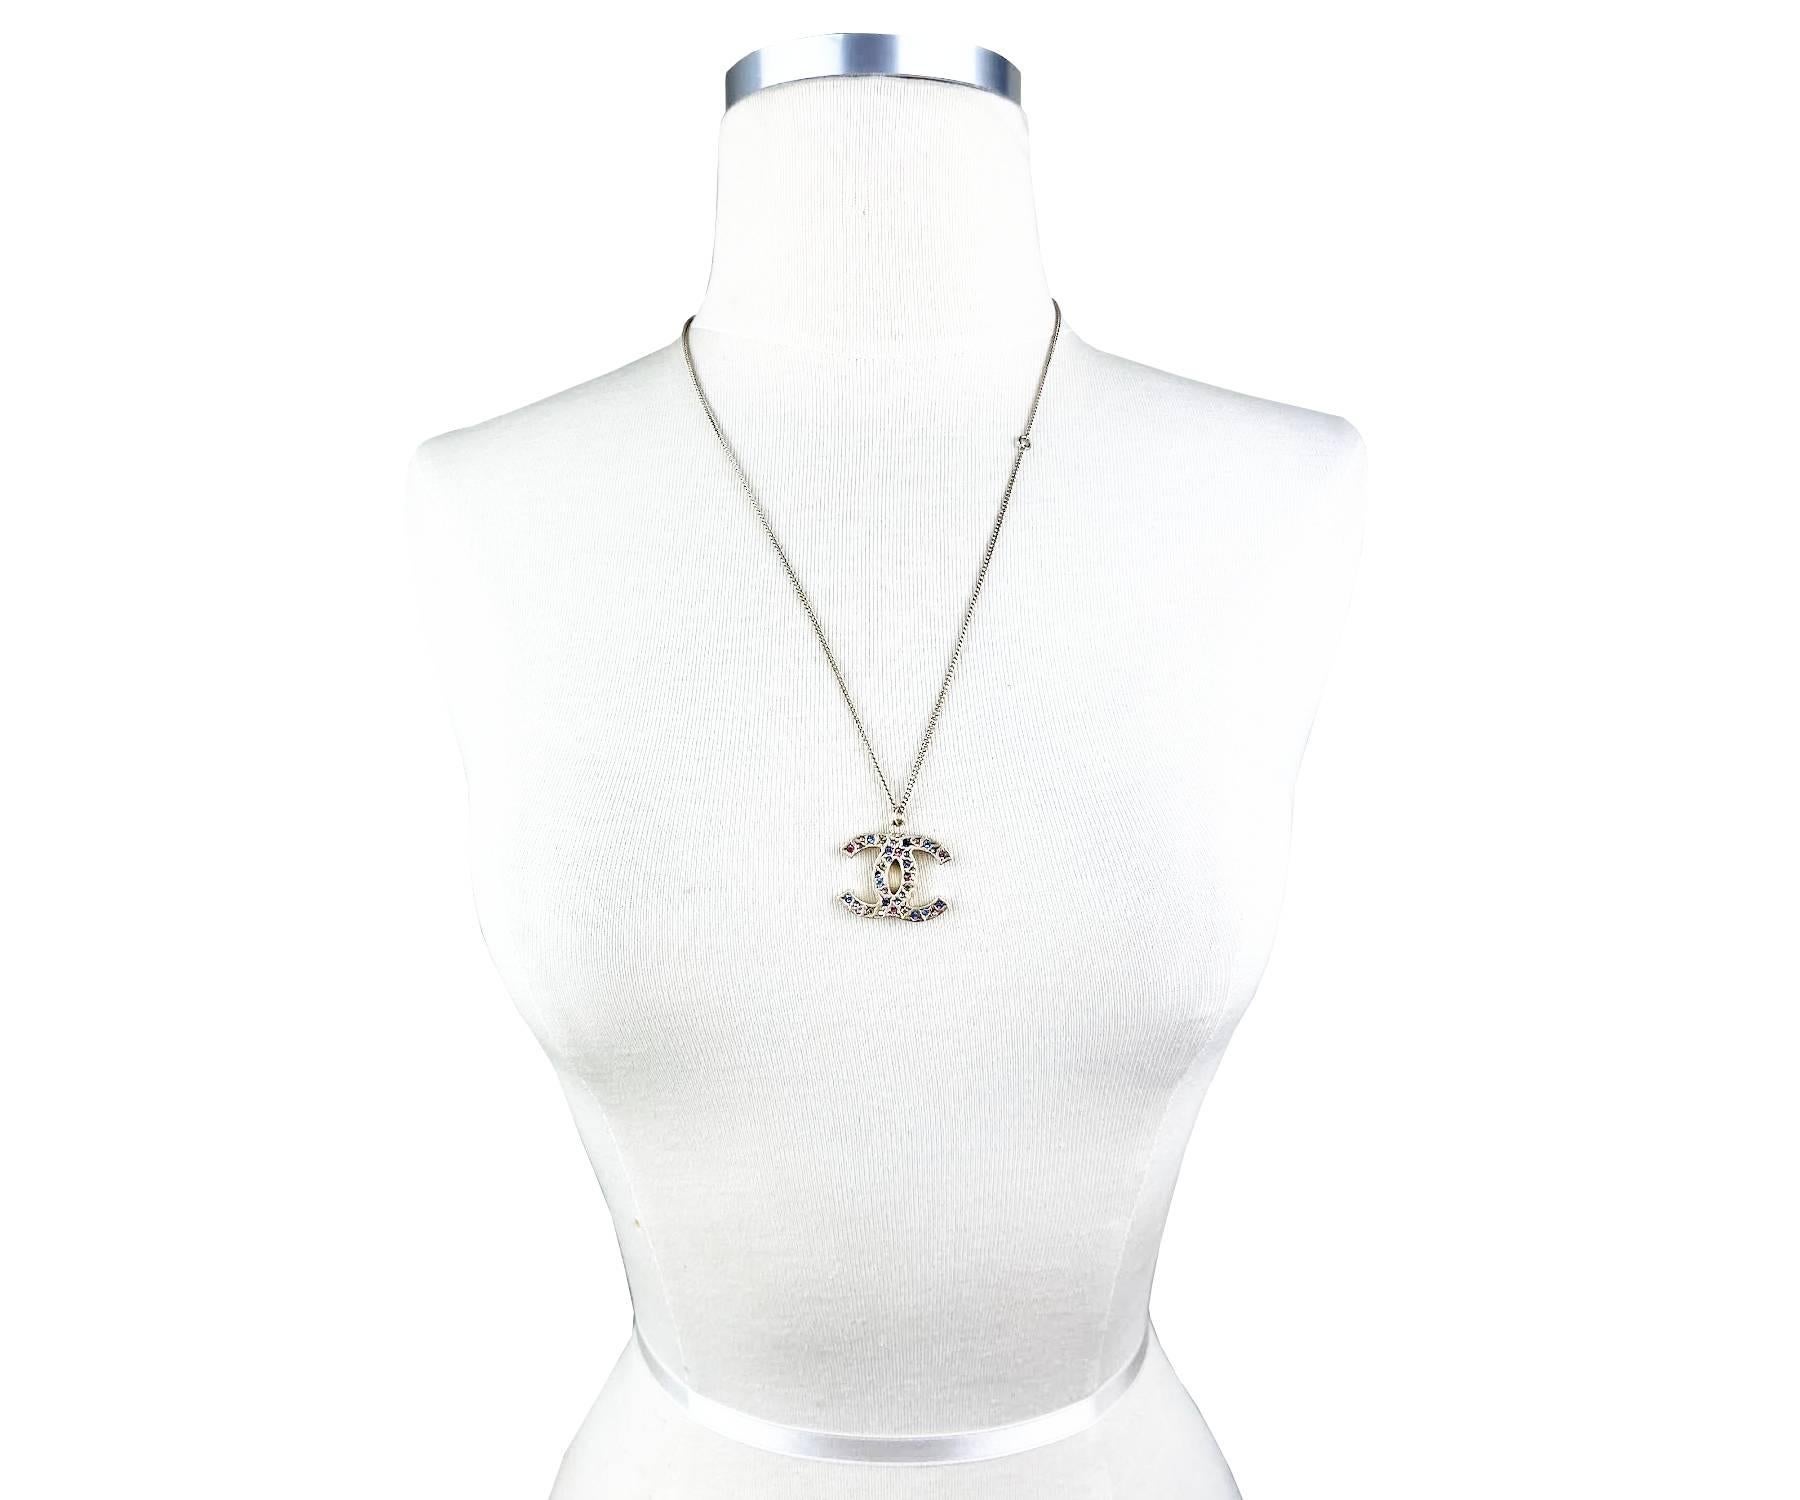 Chanel Light Gold CC Pastel Crystal Medium Pendant Necklace

* Marked 06
* Made in Italy

-The pendant is approximately 1.25″ x 1″.
-The chain is approximately 17″ to 24″.
-In an excellent condition.

2046-46401

